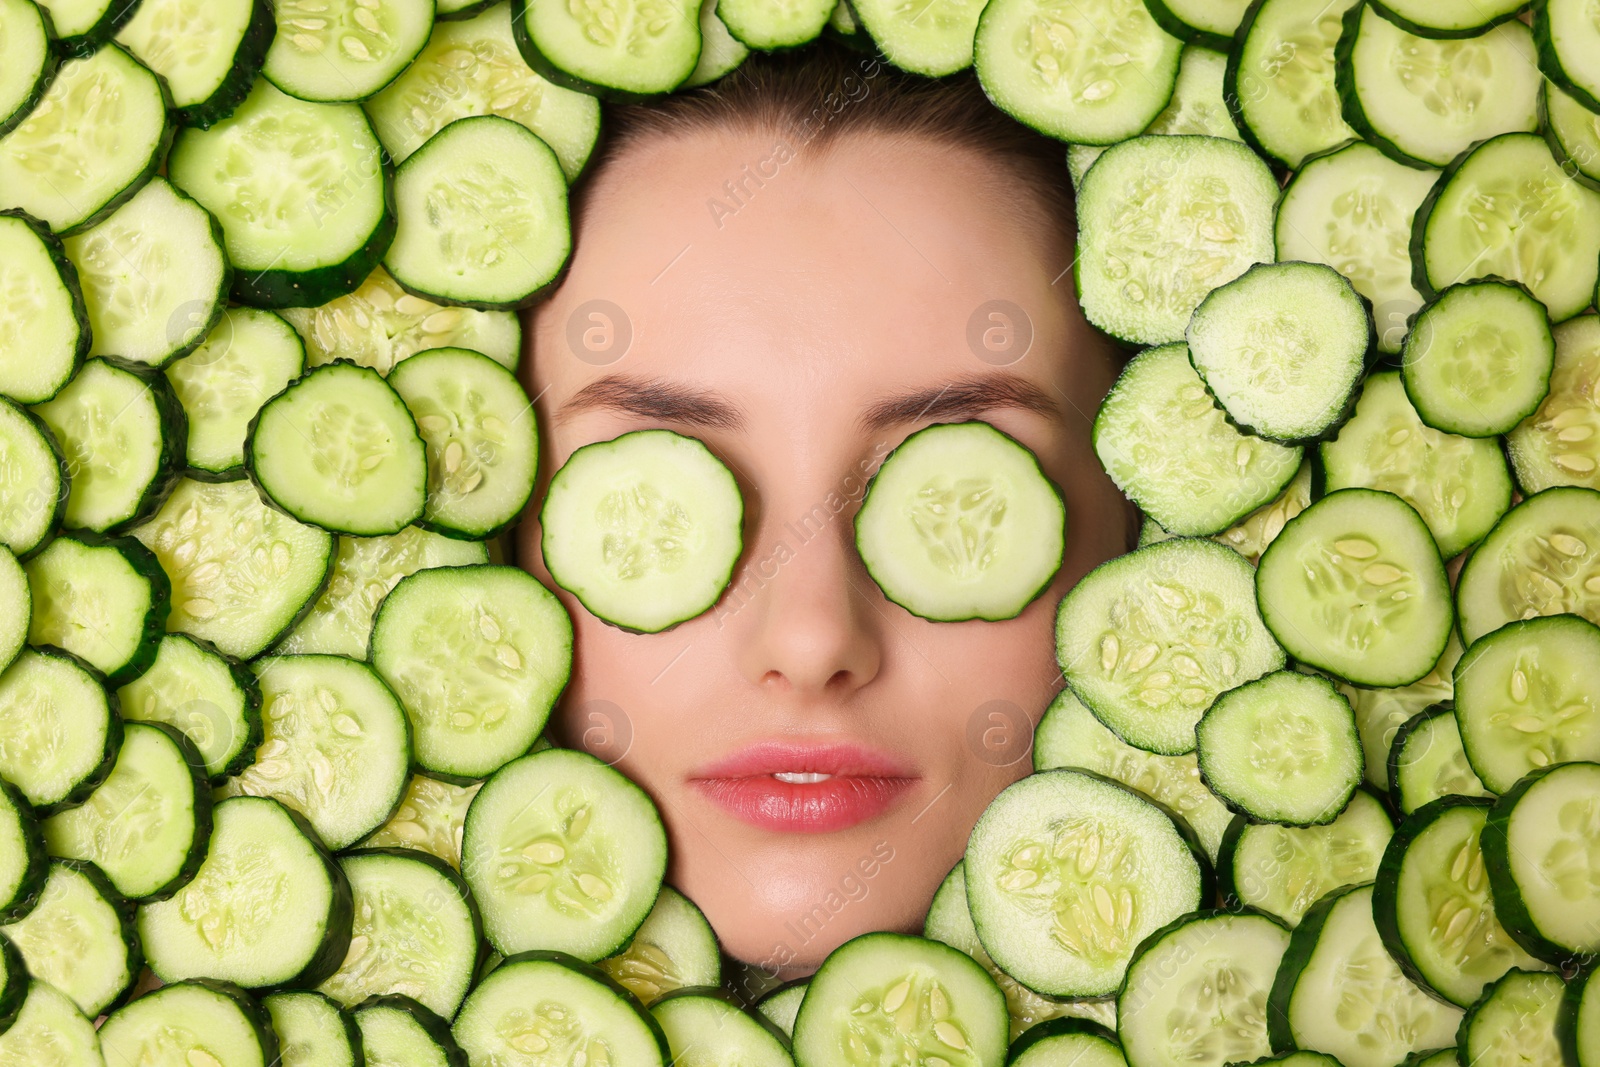 Photo of Beautiful woman among cucumber slices, top view